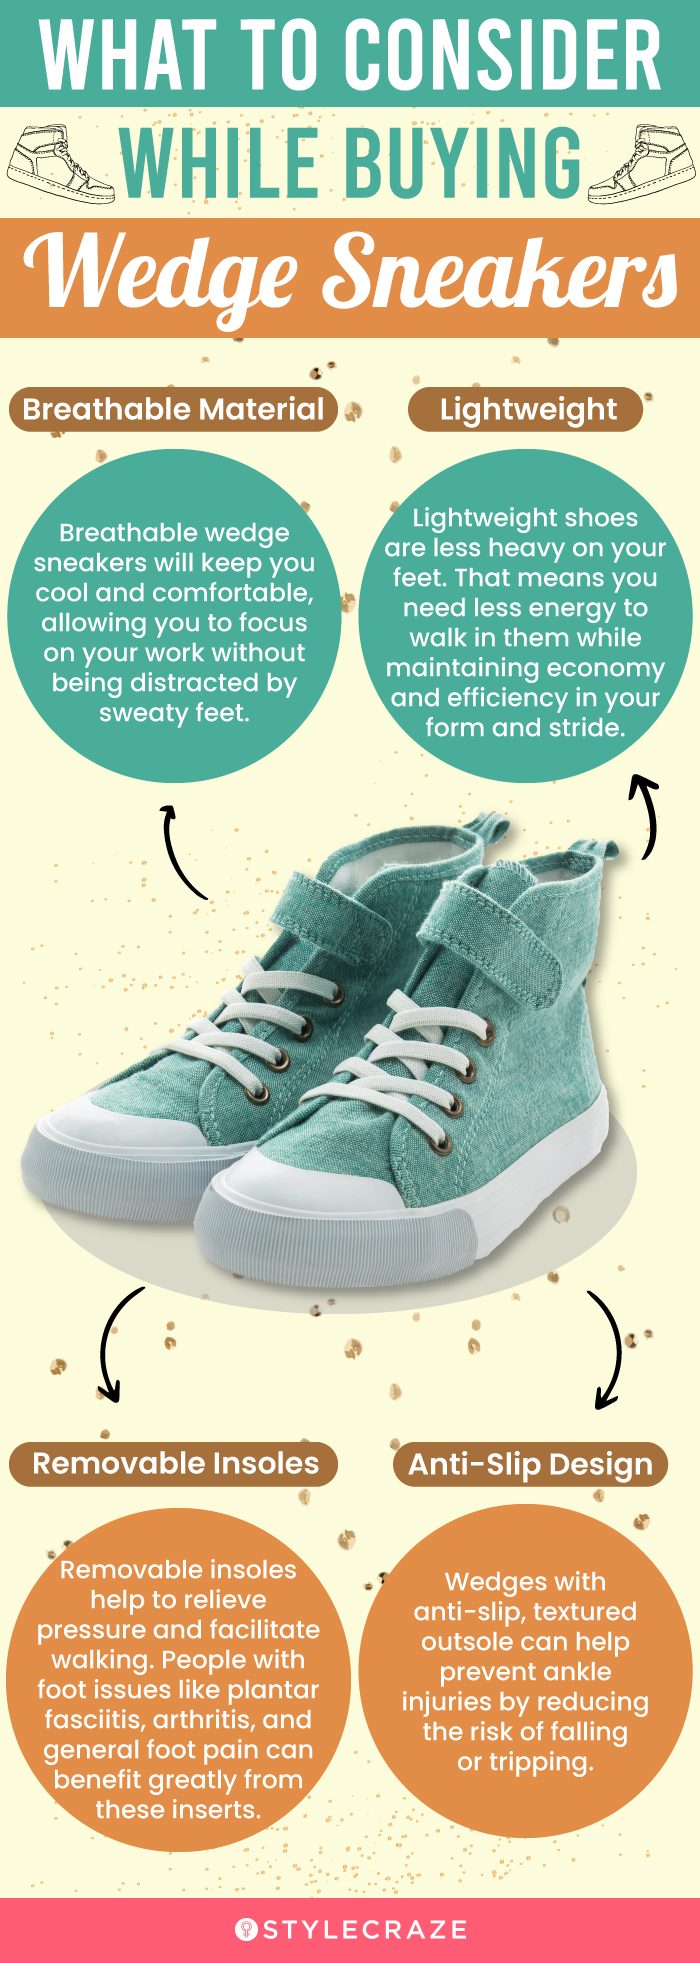 What To Consider While Buying Wedge Sneakers (infographic)